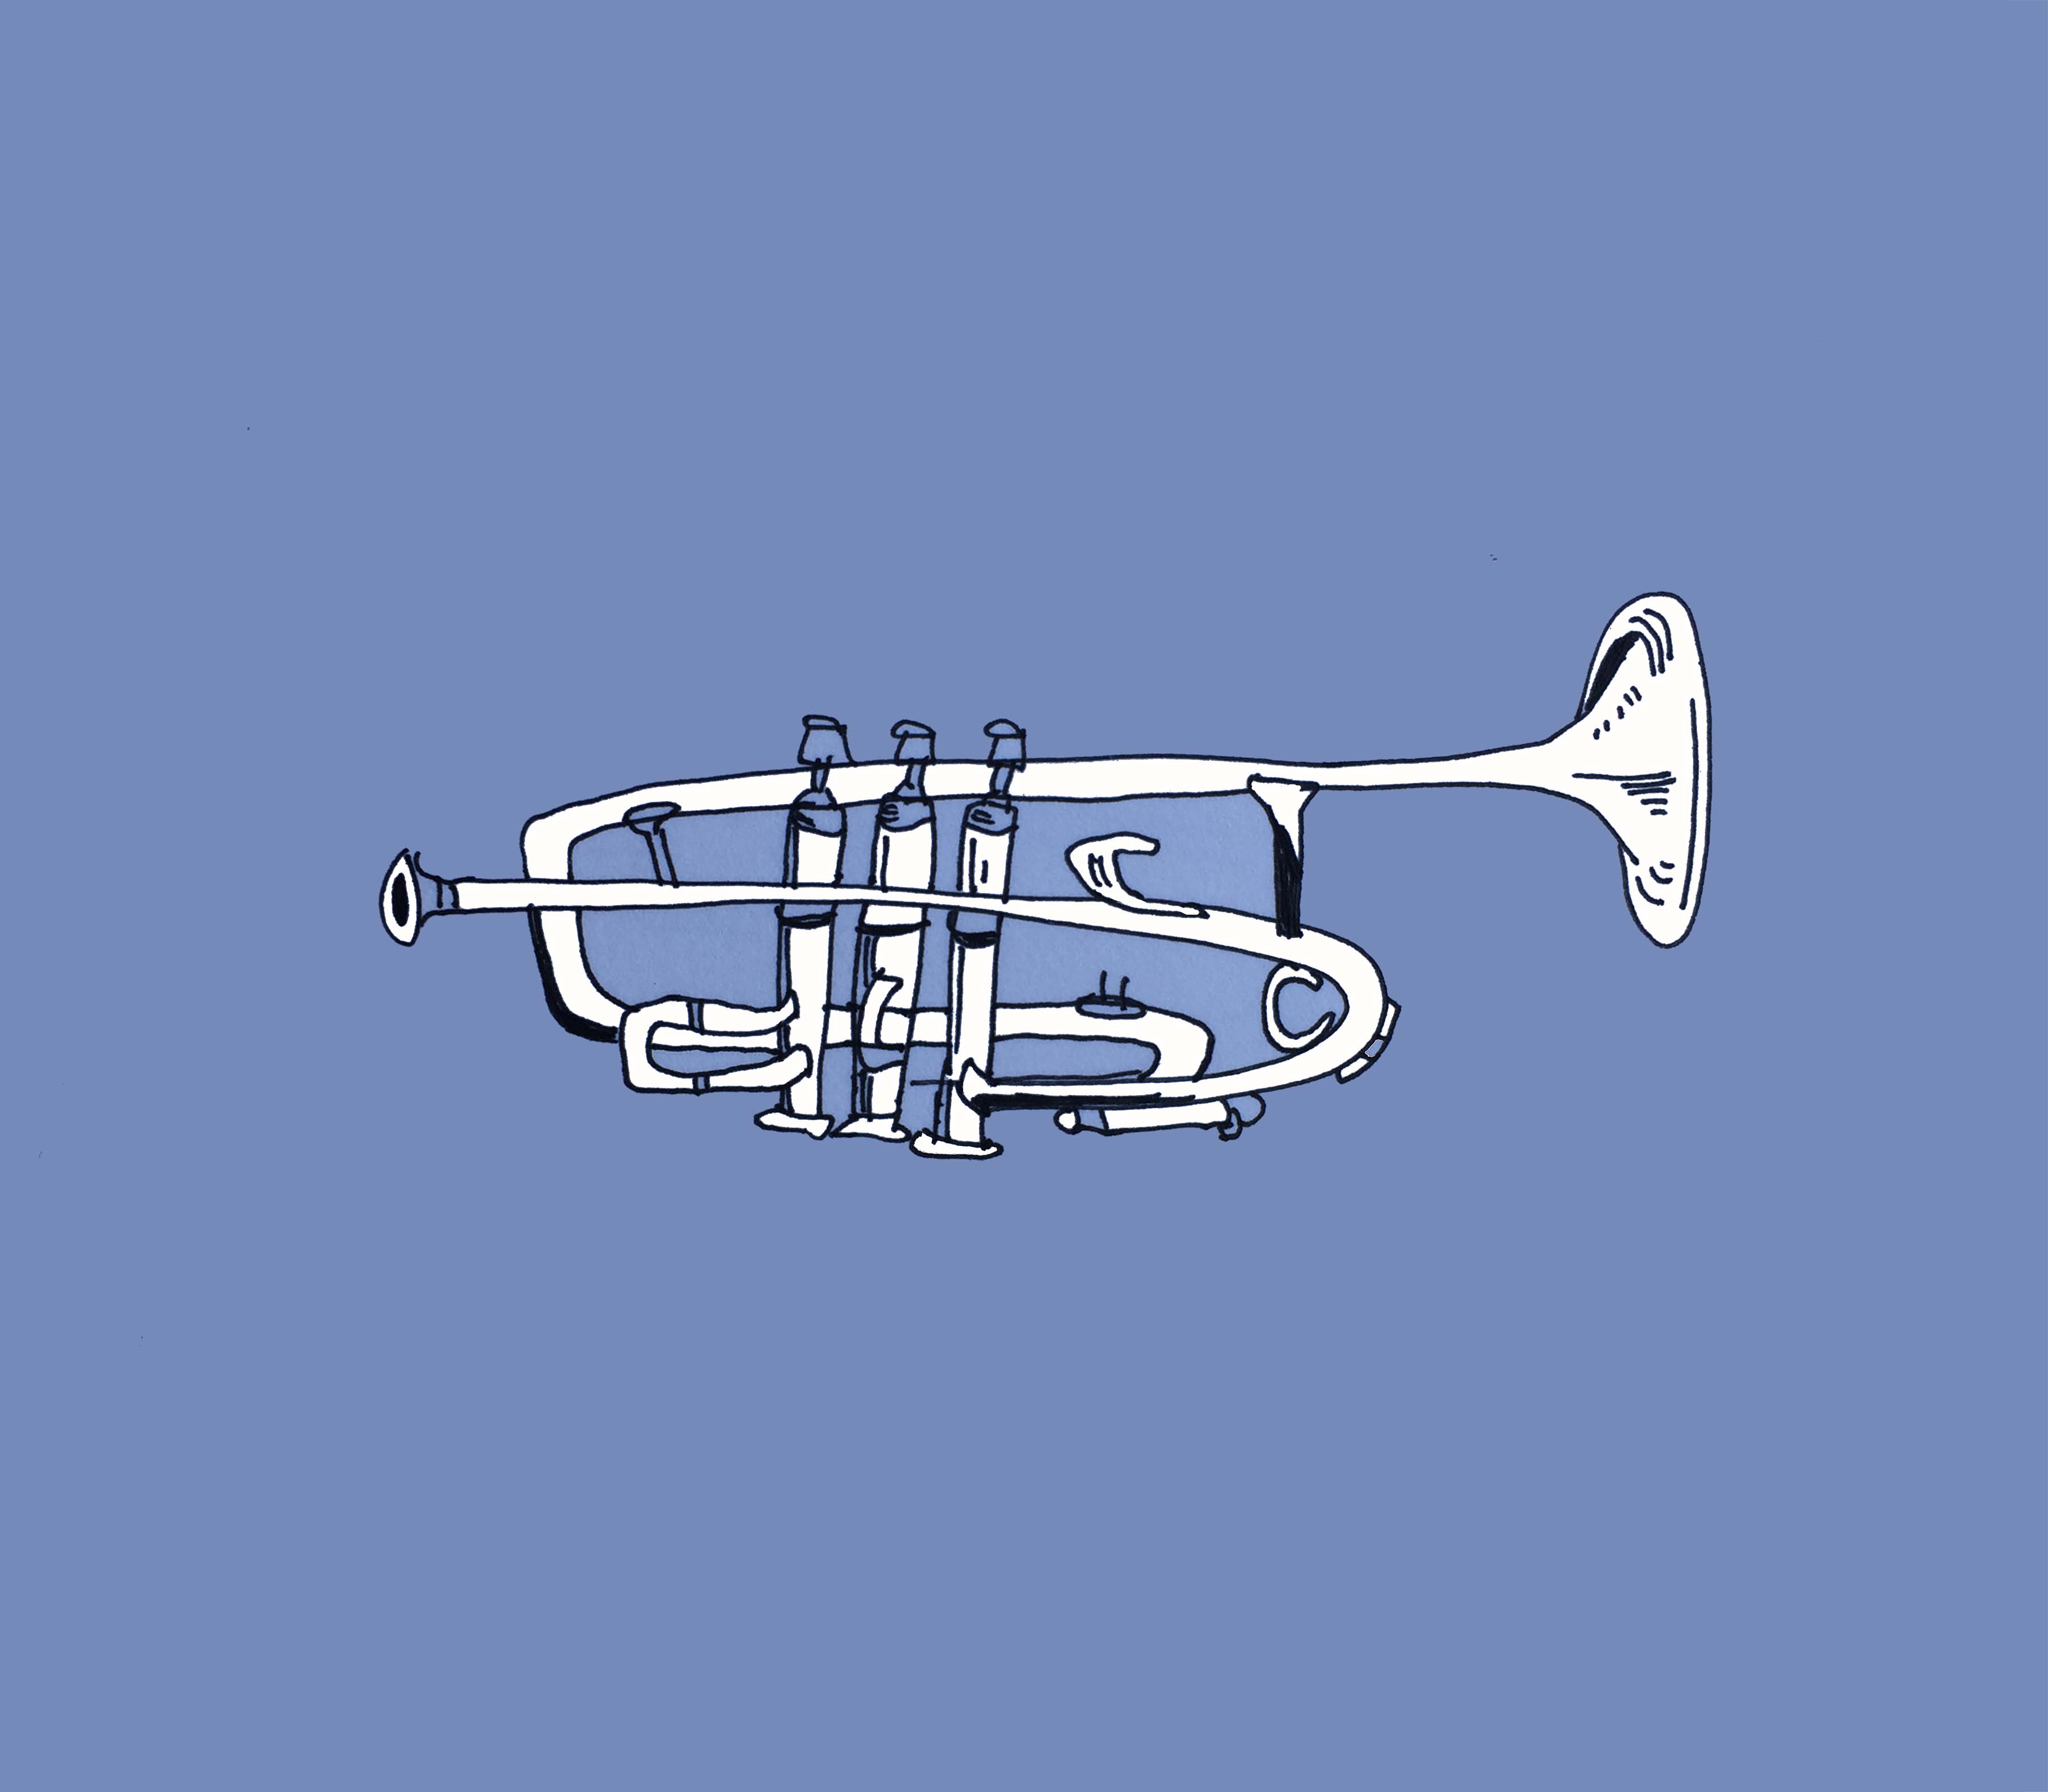 art every day number 116 / illustration / drawing / trumpet